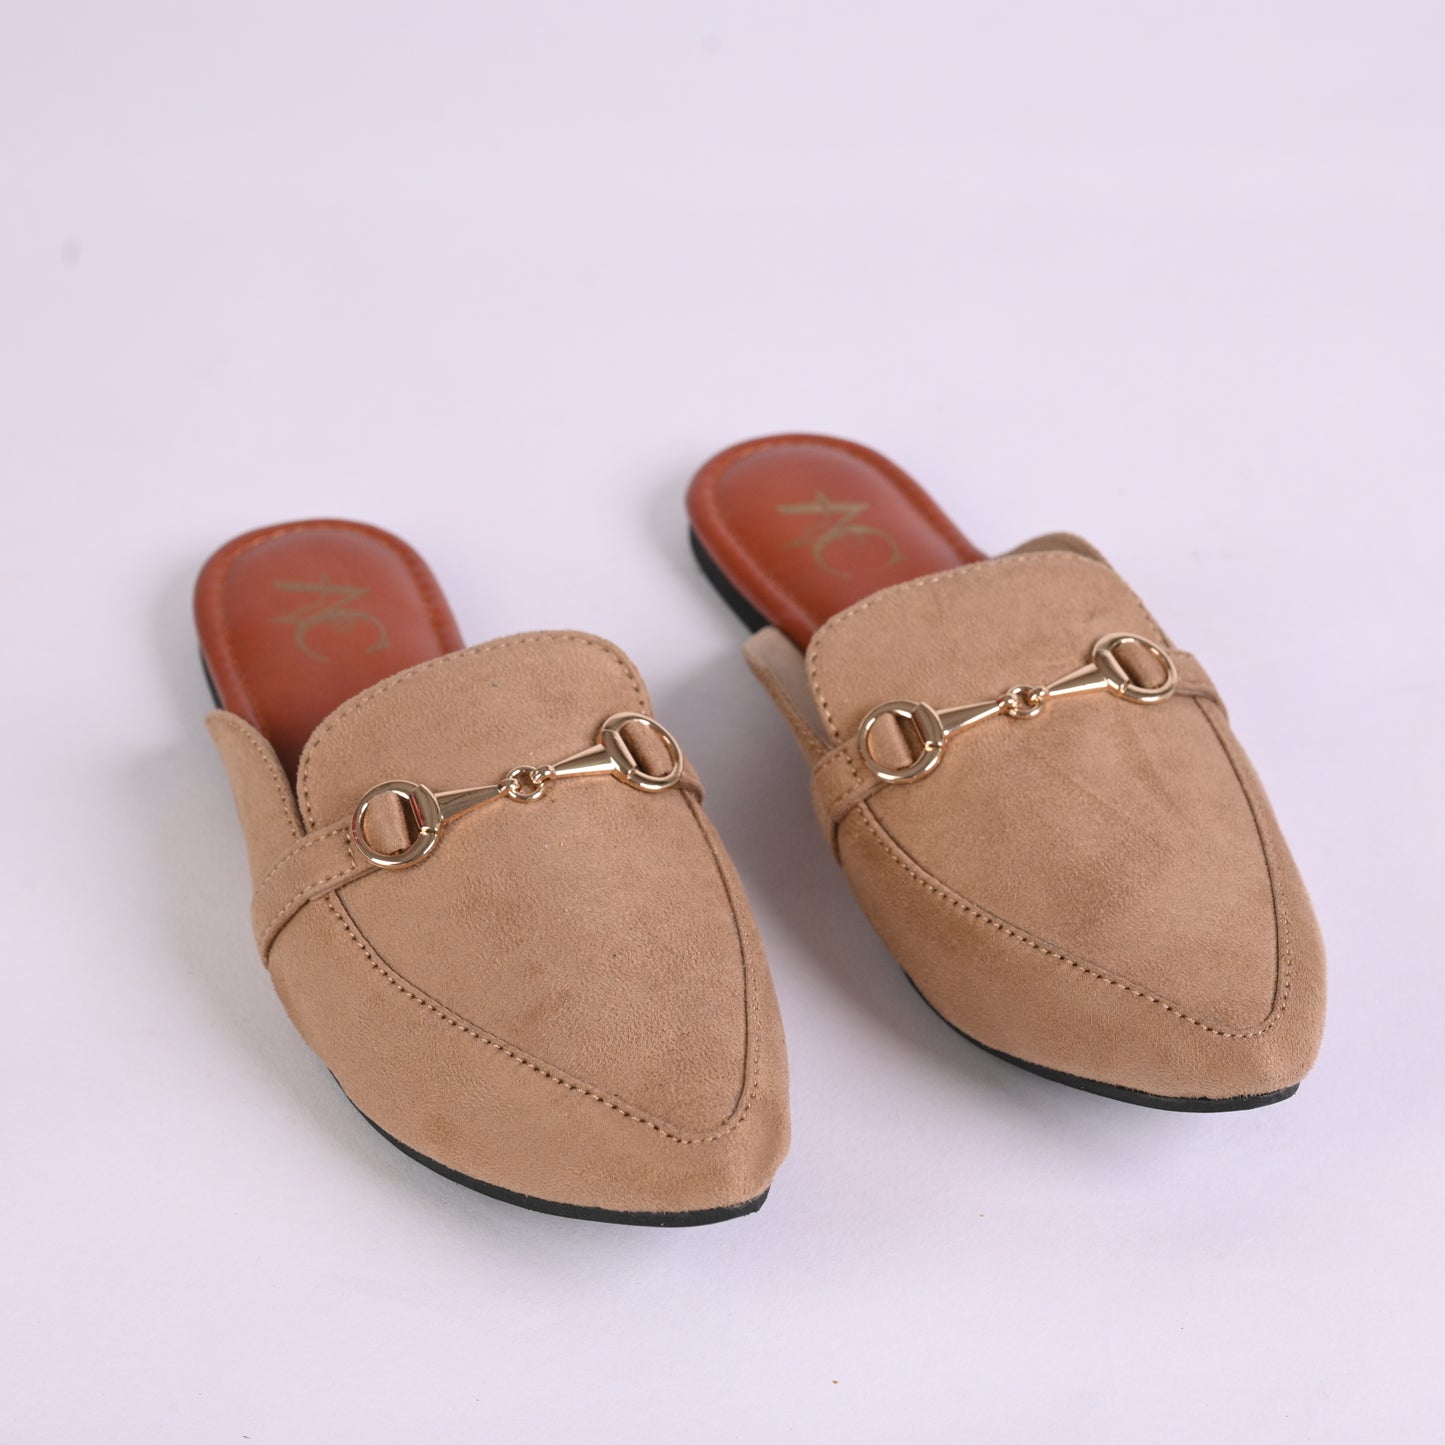 Pointed Buckled Women Mules (Mouse)